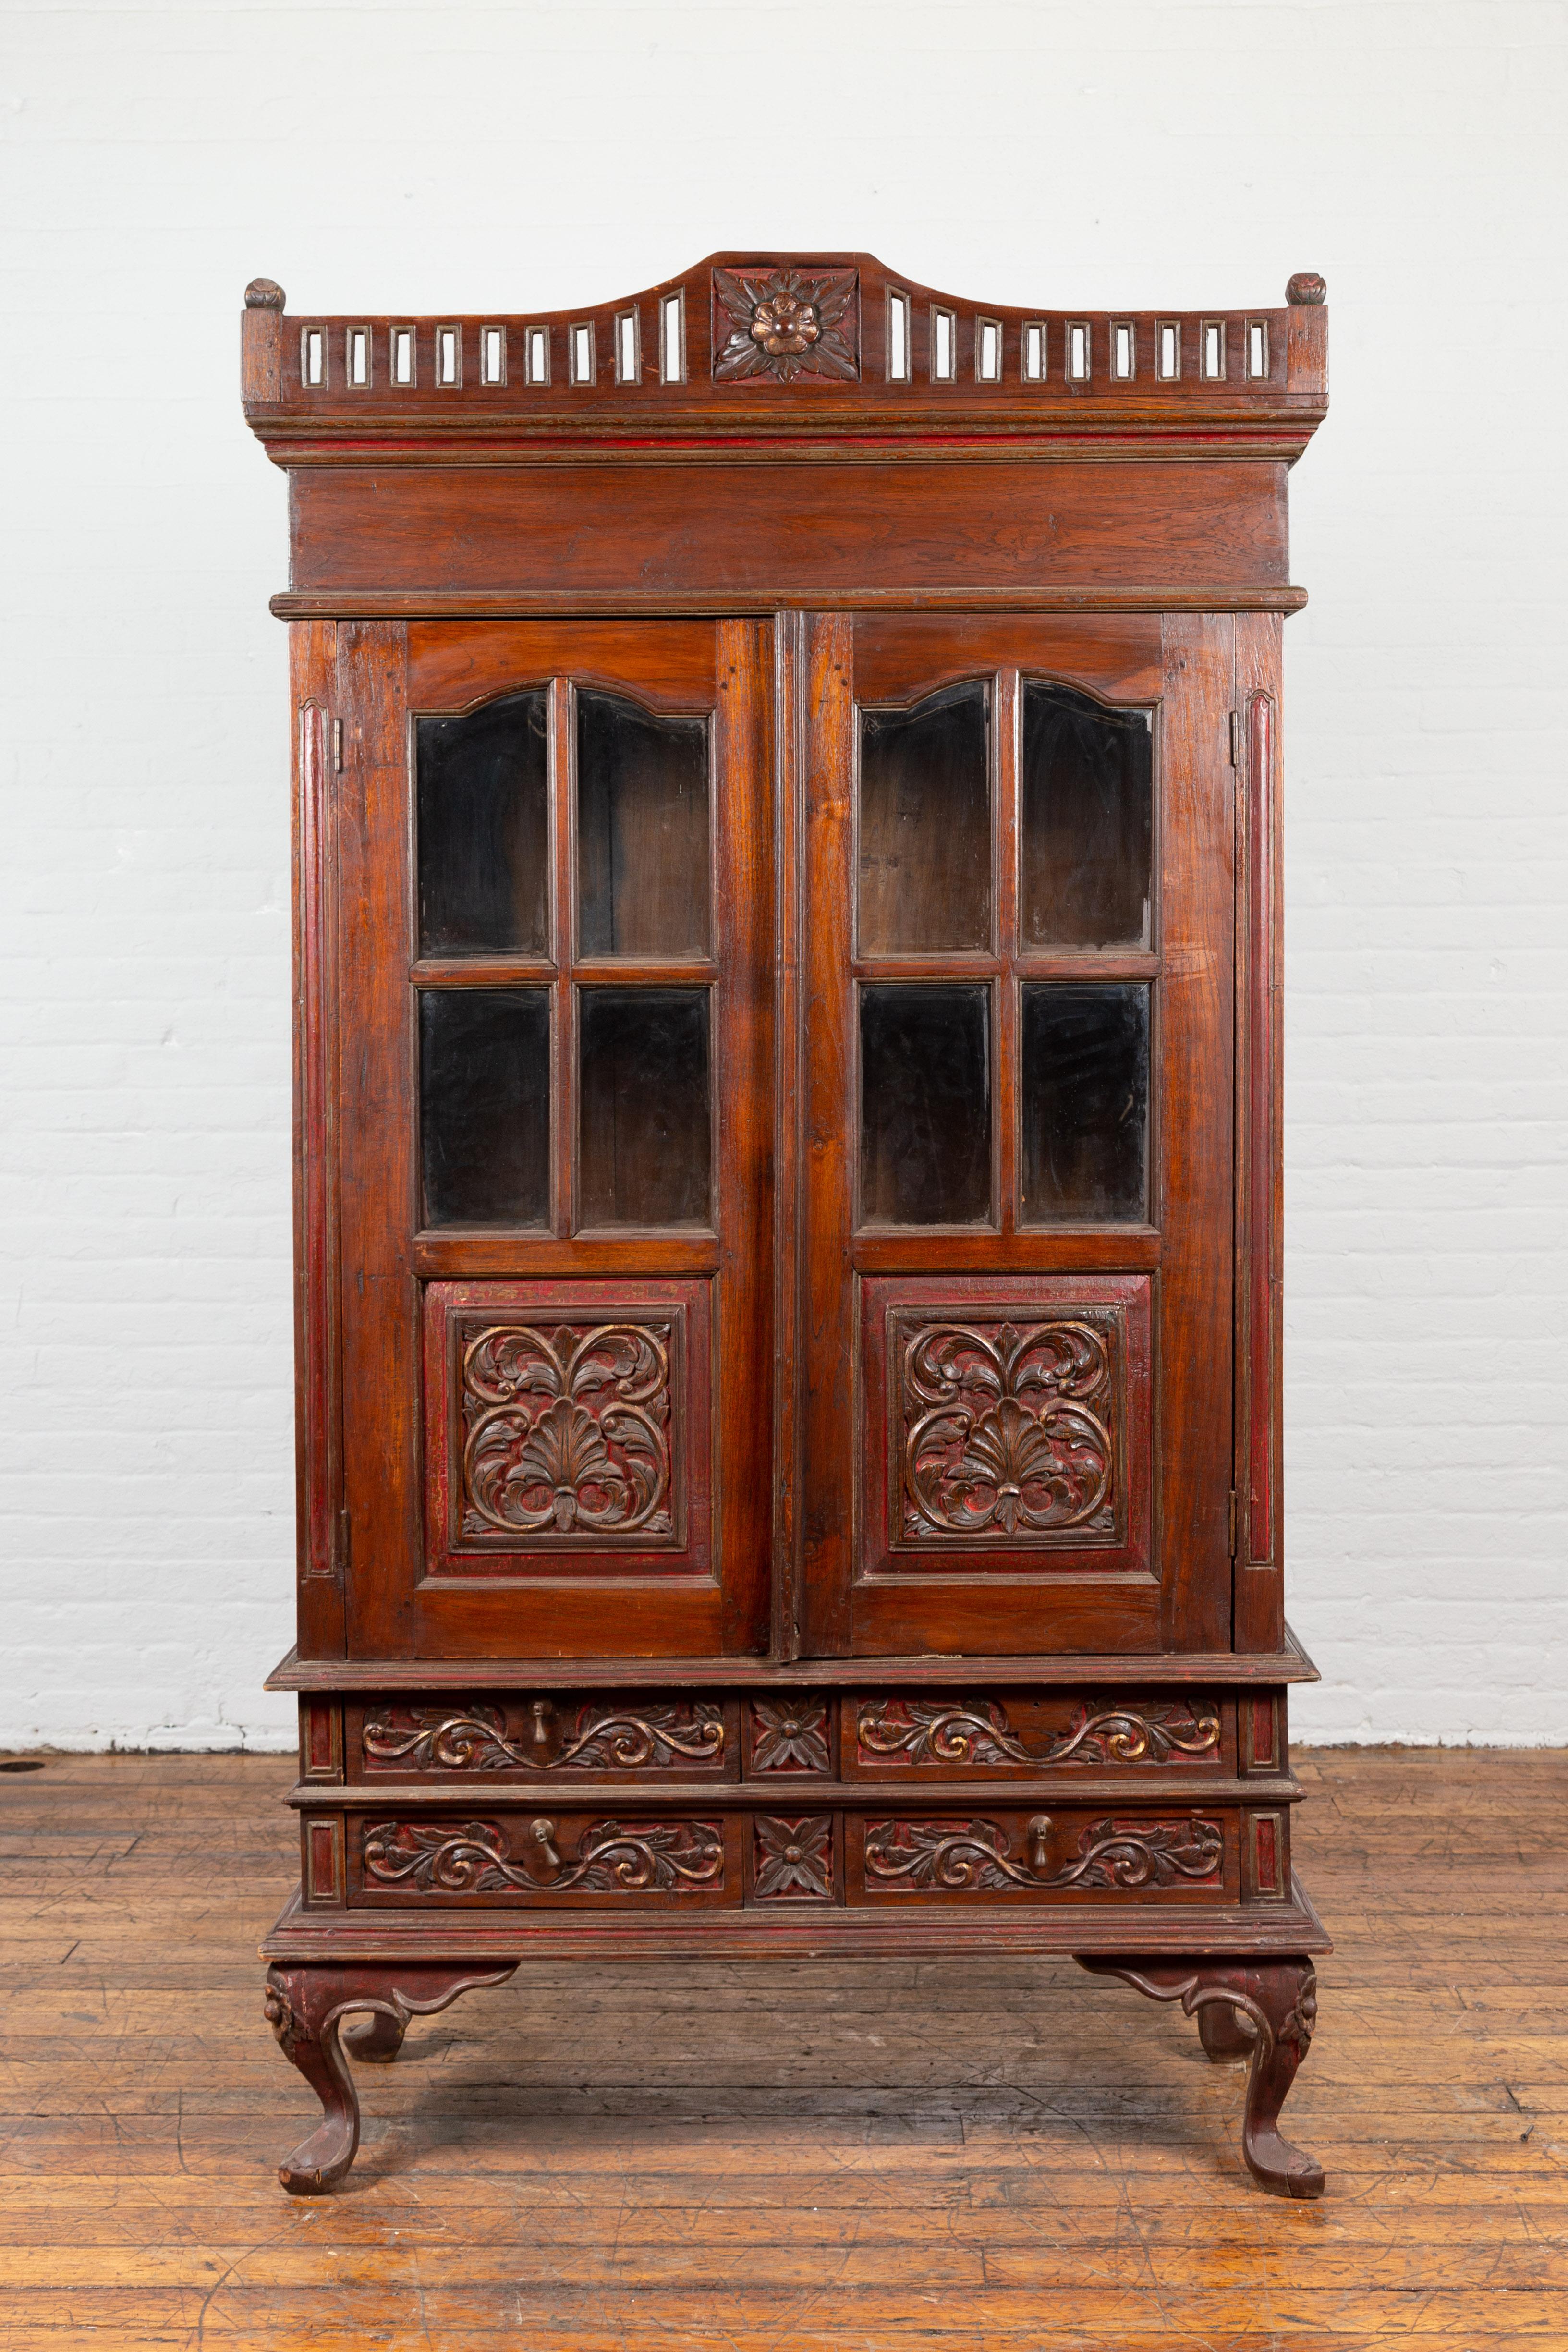 A Dutch Colonial period Indonesian display cabinet from the early 20th century, with carved motifs, glass doors and cabriole legs. Created in Indonesia during the early years of the 20th century, this Dutch Colonial display cabinet features an